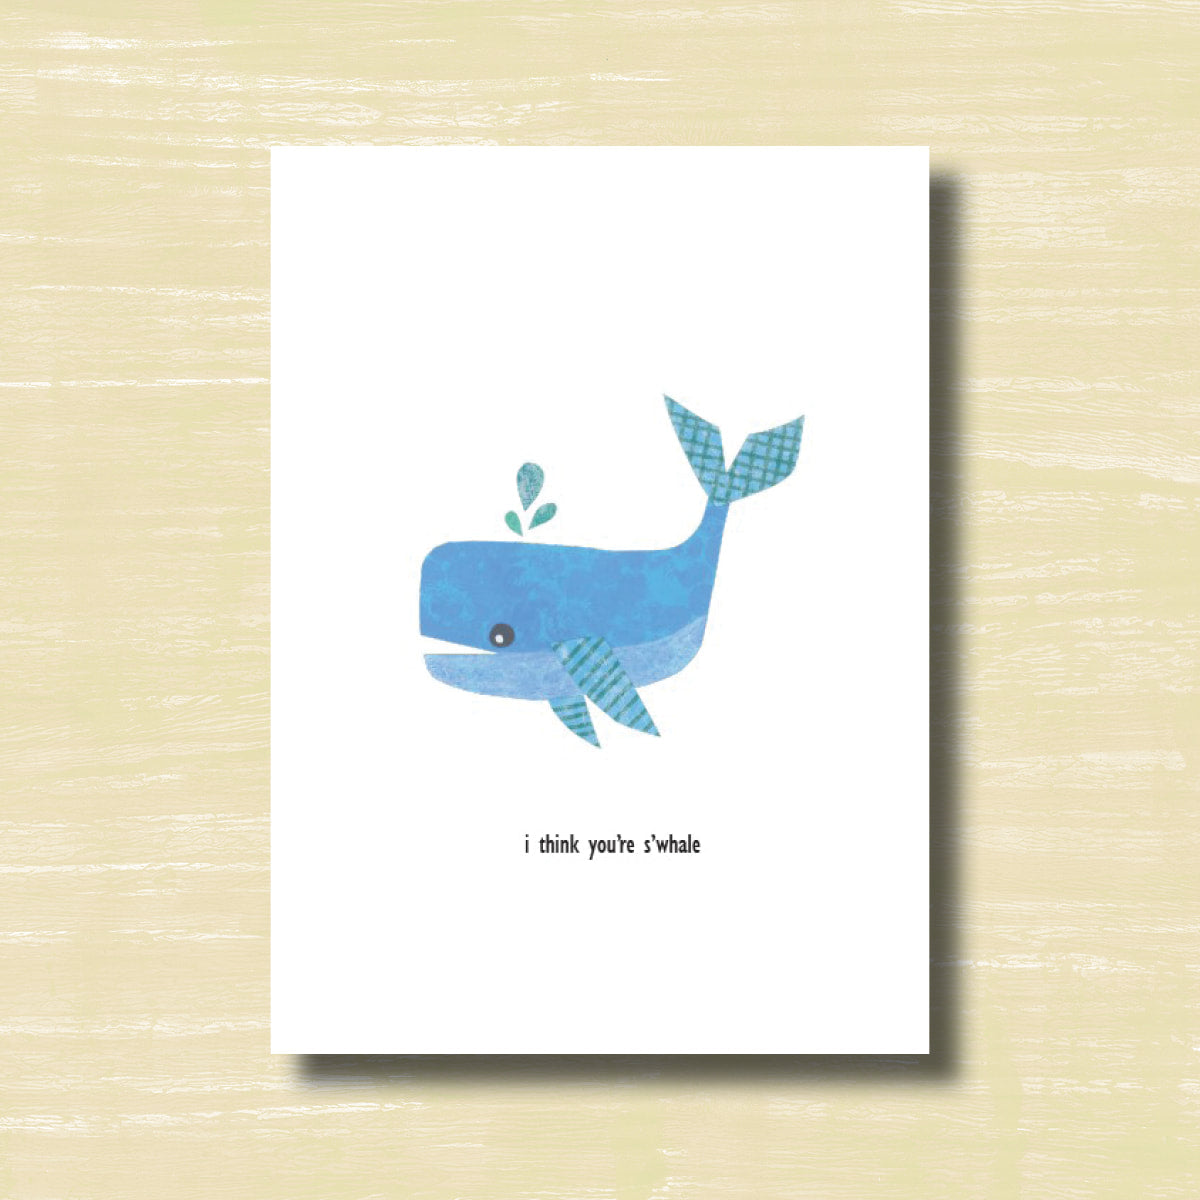 S'whale - greeting card